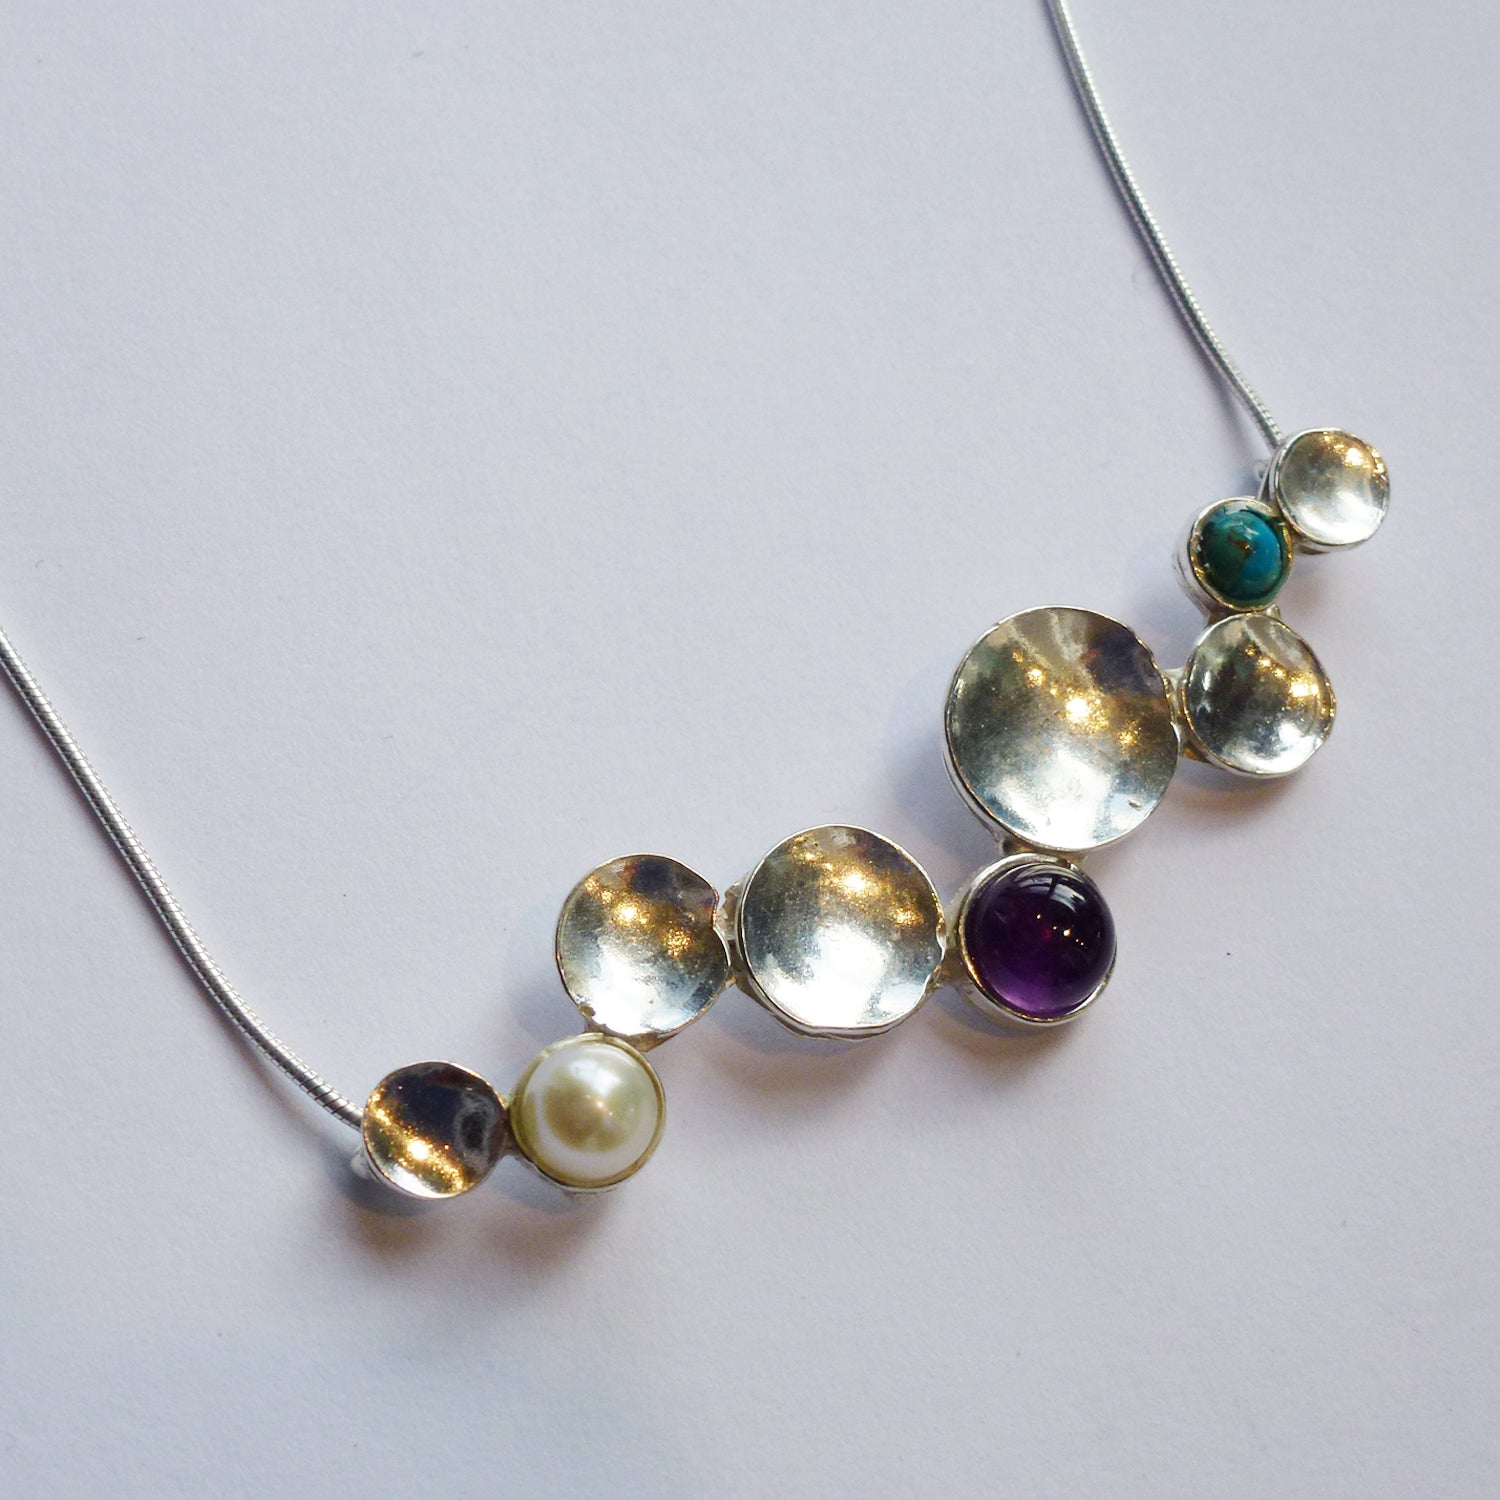 Yair Stern - Multicolored Ponds Necklace